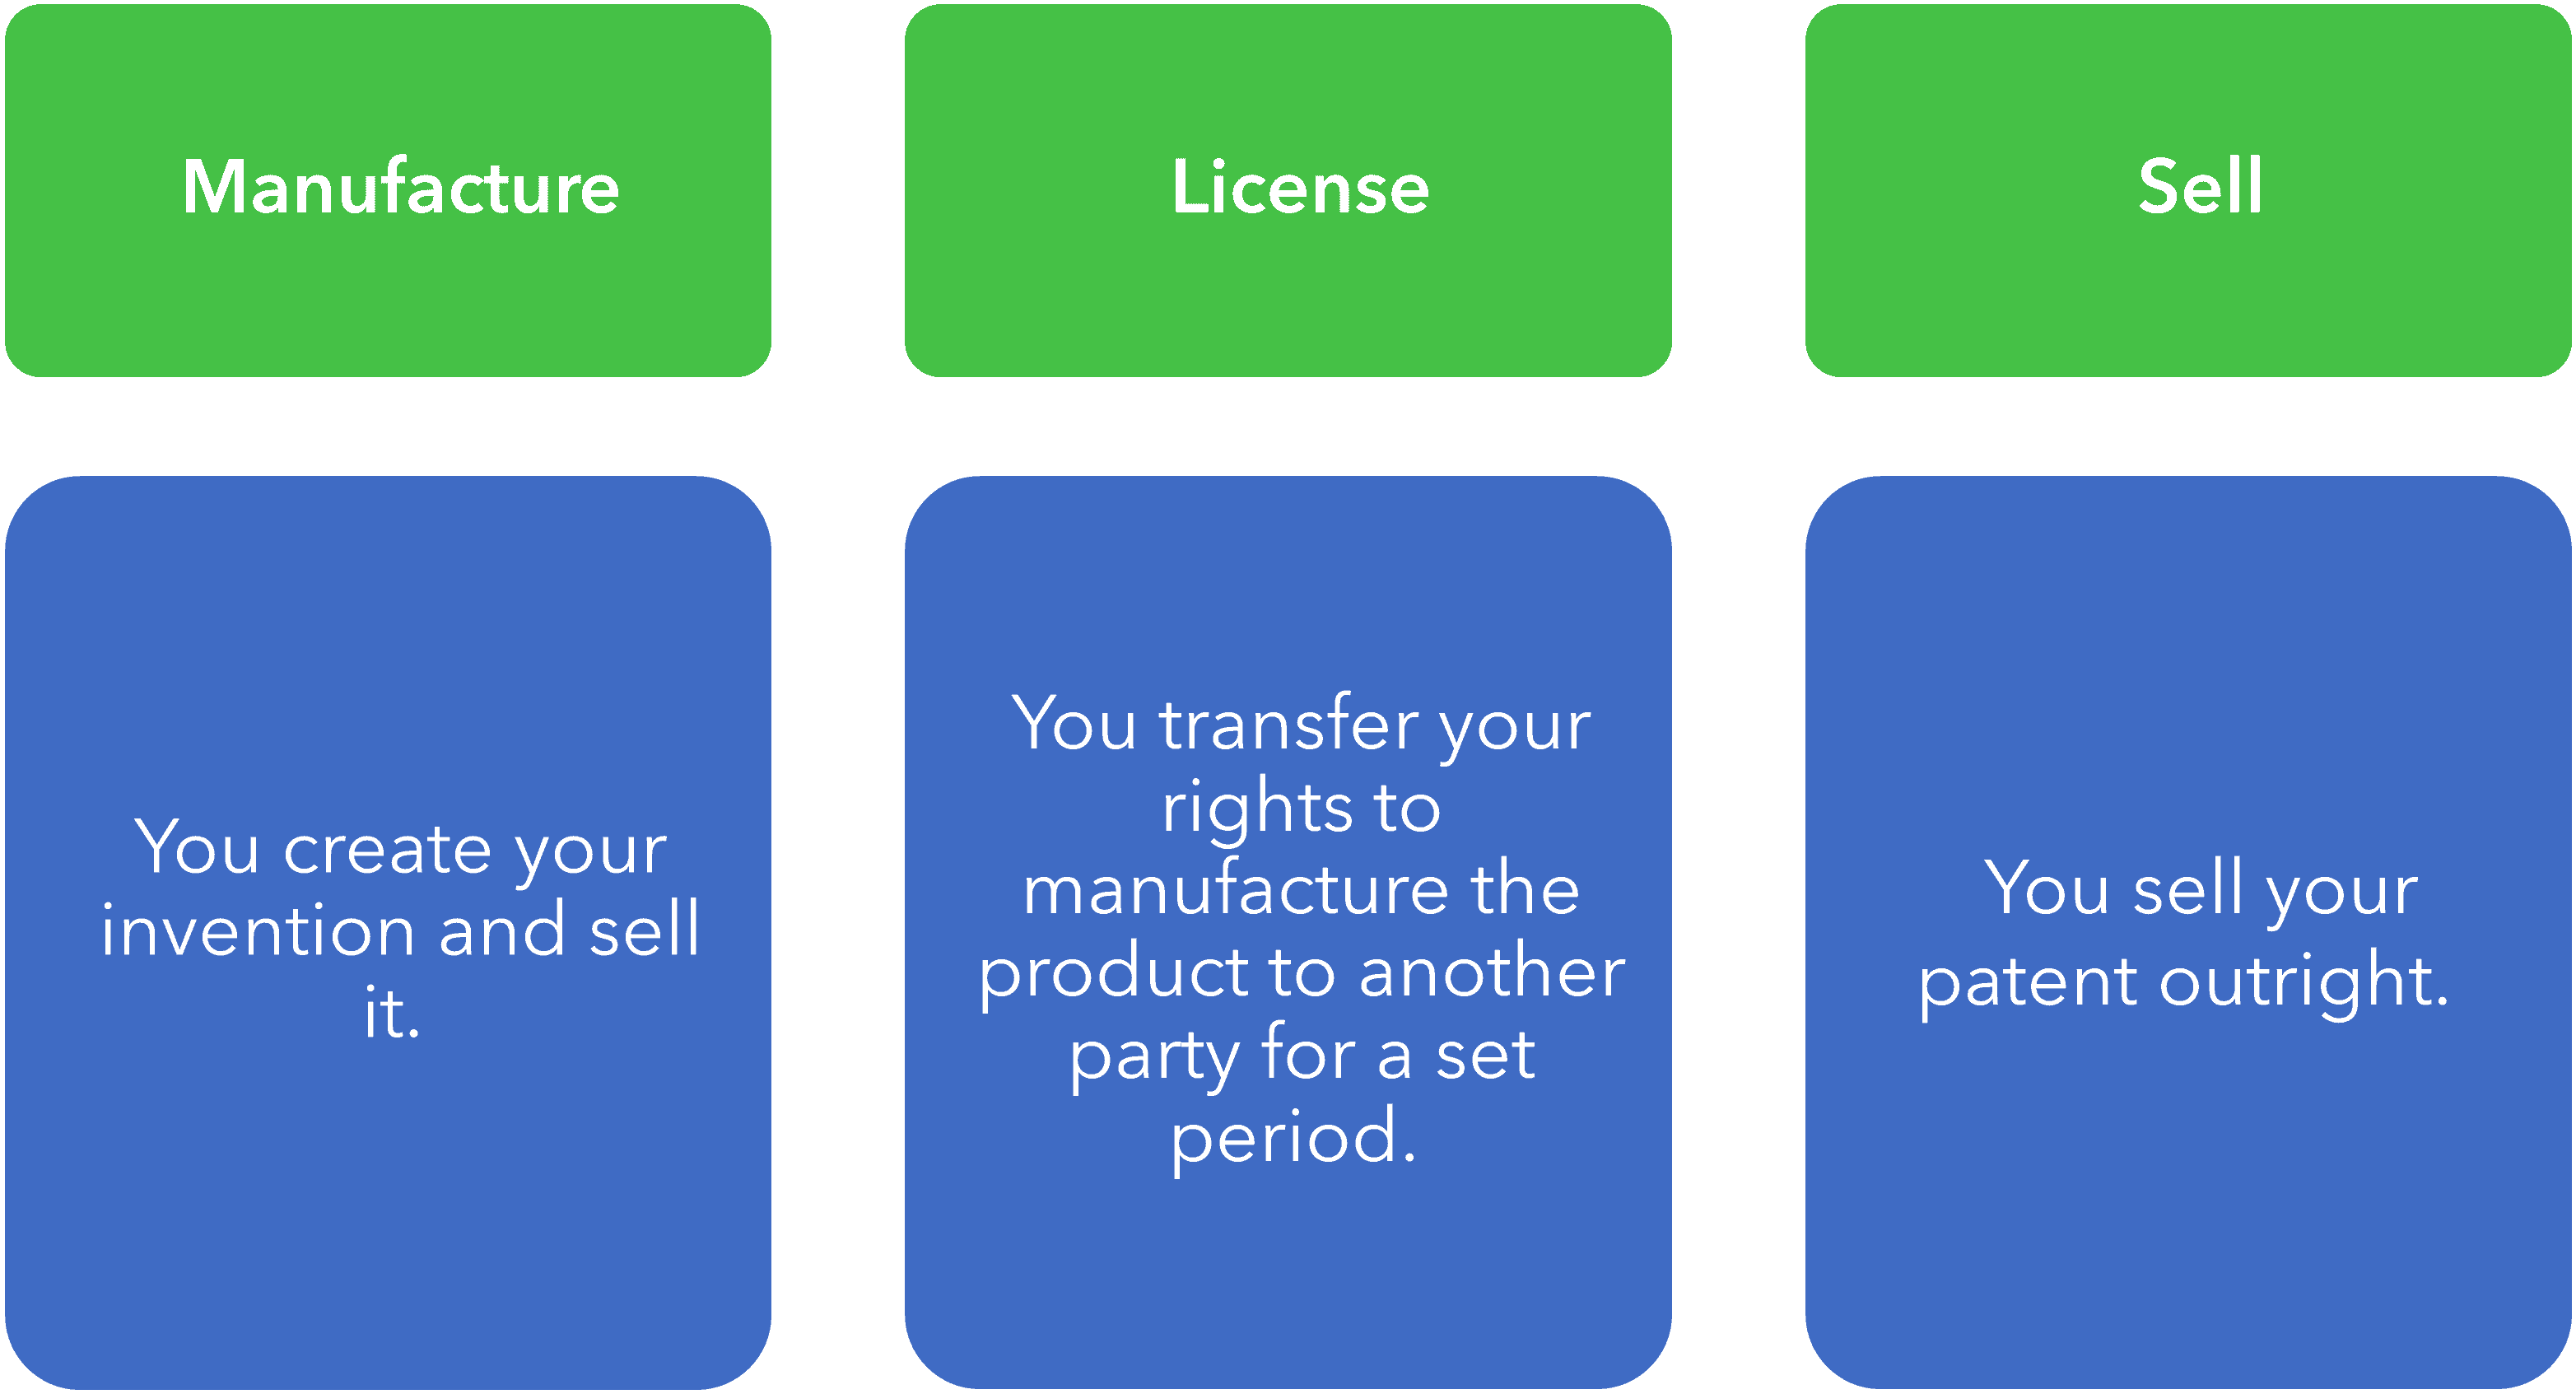 Manufacture: You create your invention and sell it. License: You transfer your rights to manufacture the product to another party for a set period. Sell: You sell your patent outright.